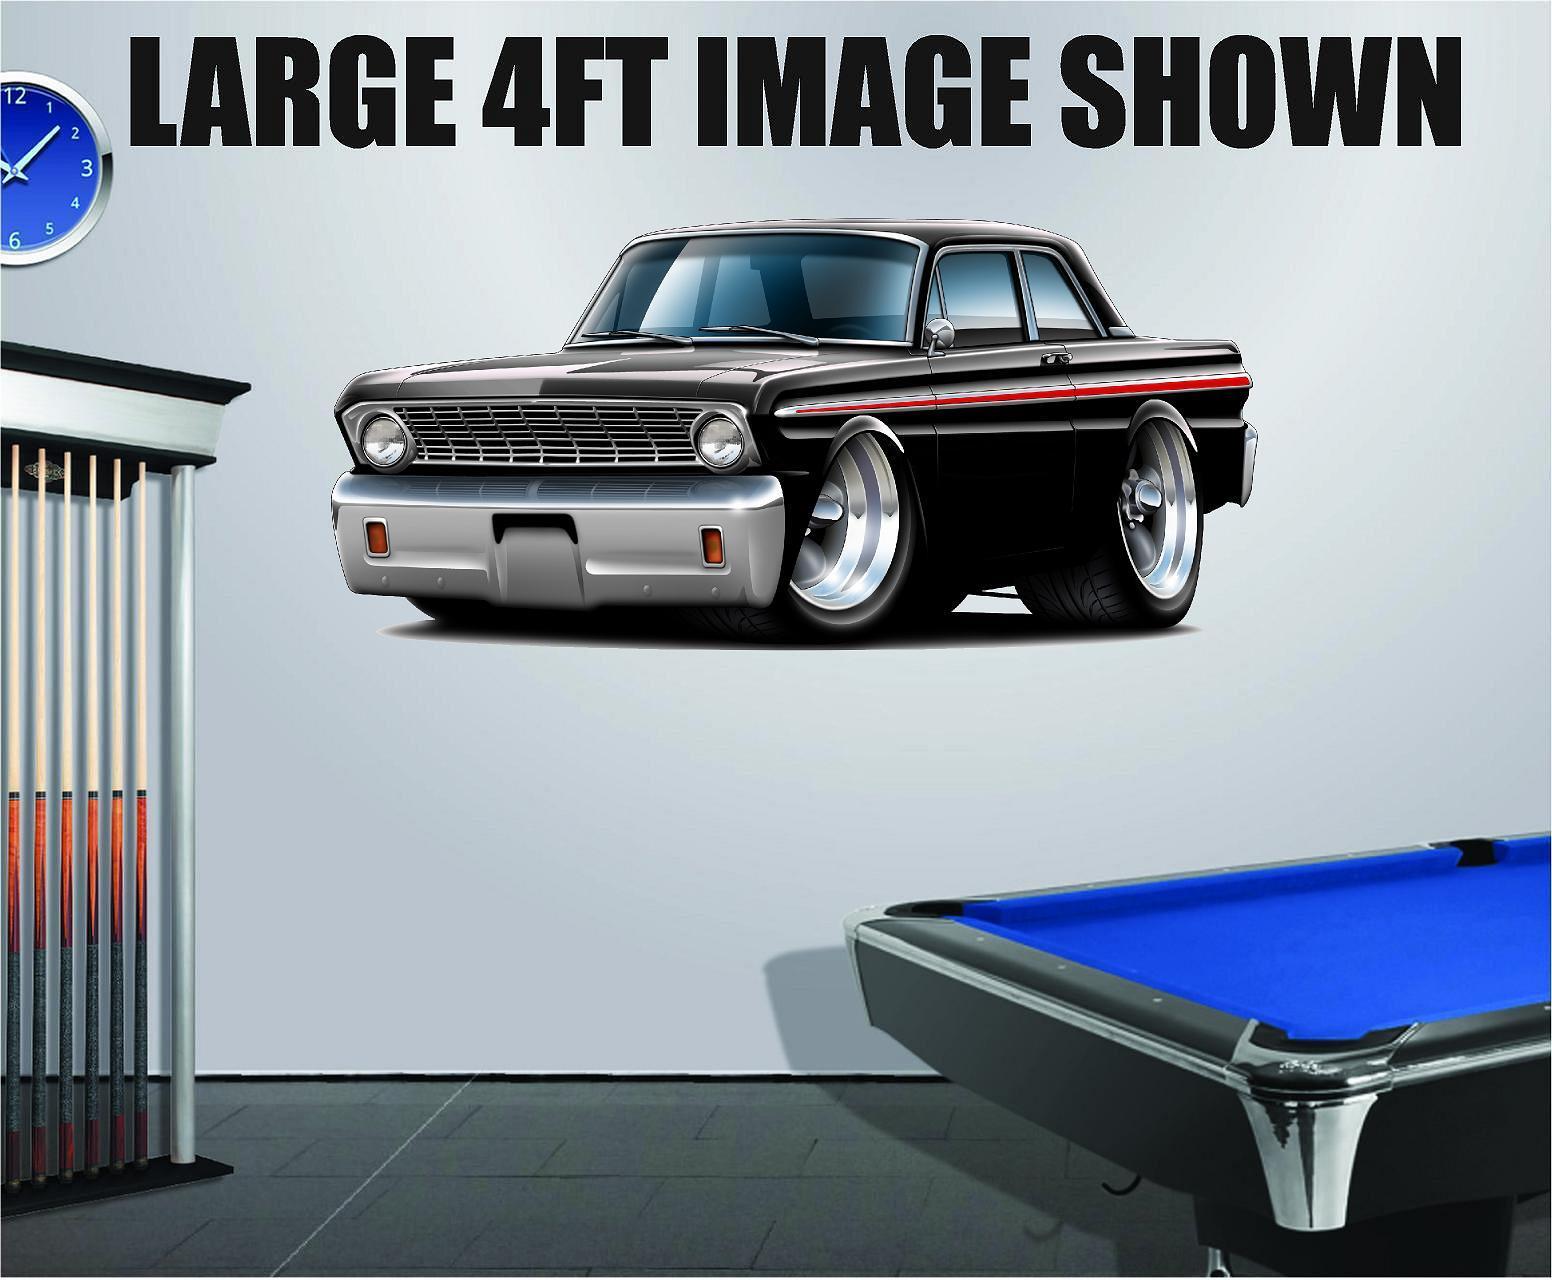 1964 Ford Falcon 260 Classic Art Wall Poster Decal Man Cave Graphics Garage 